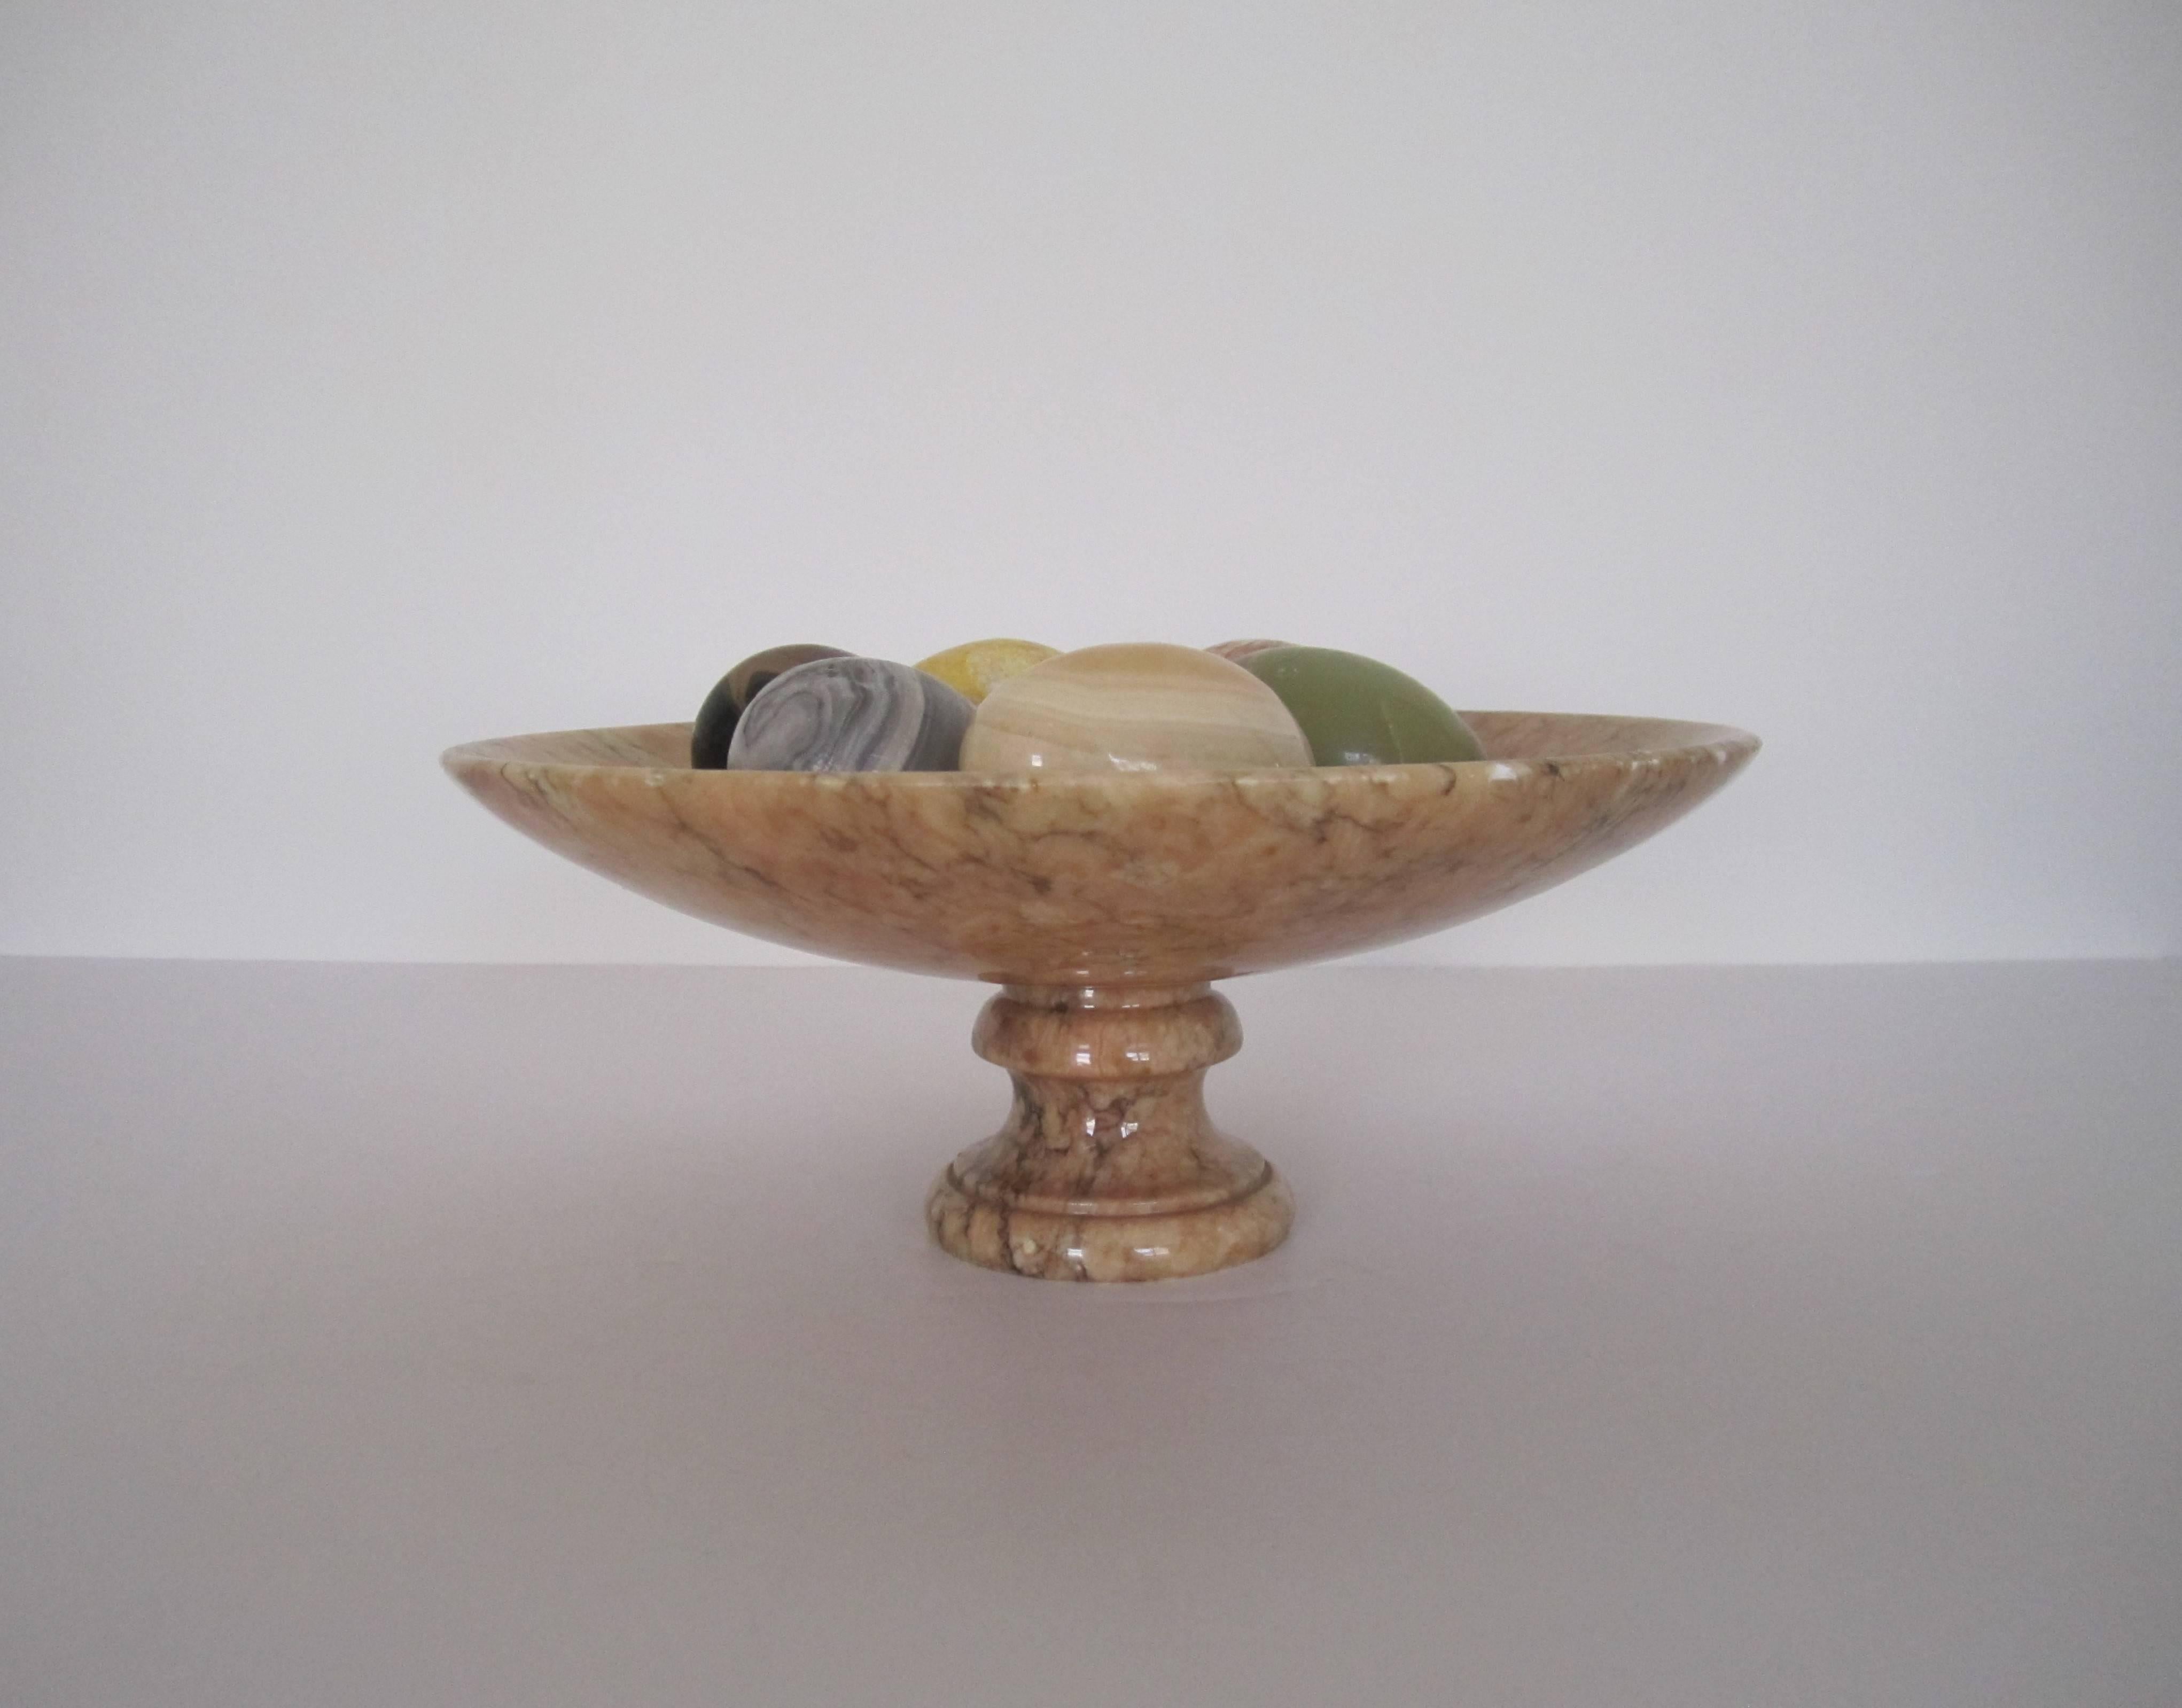 Carved Vintage Alabaster Tazza Centerpiece with Marble and Onyx Egg Sculptures